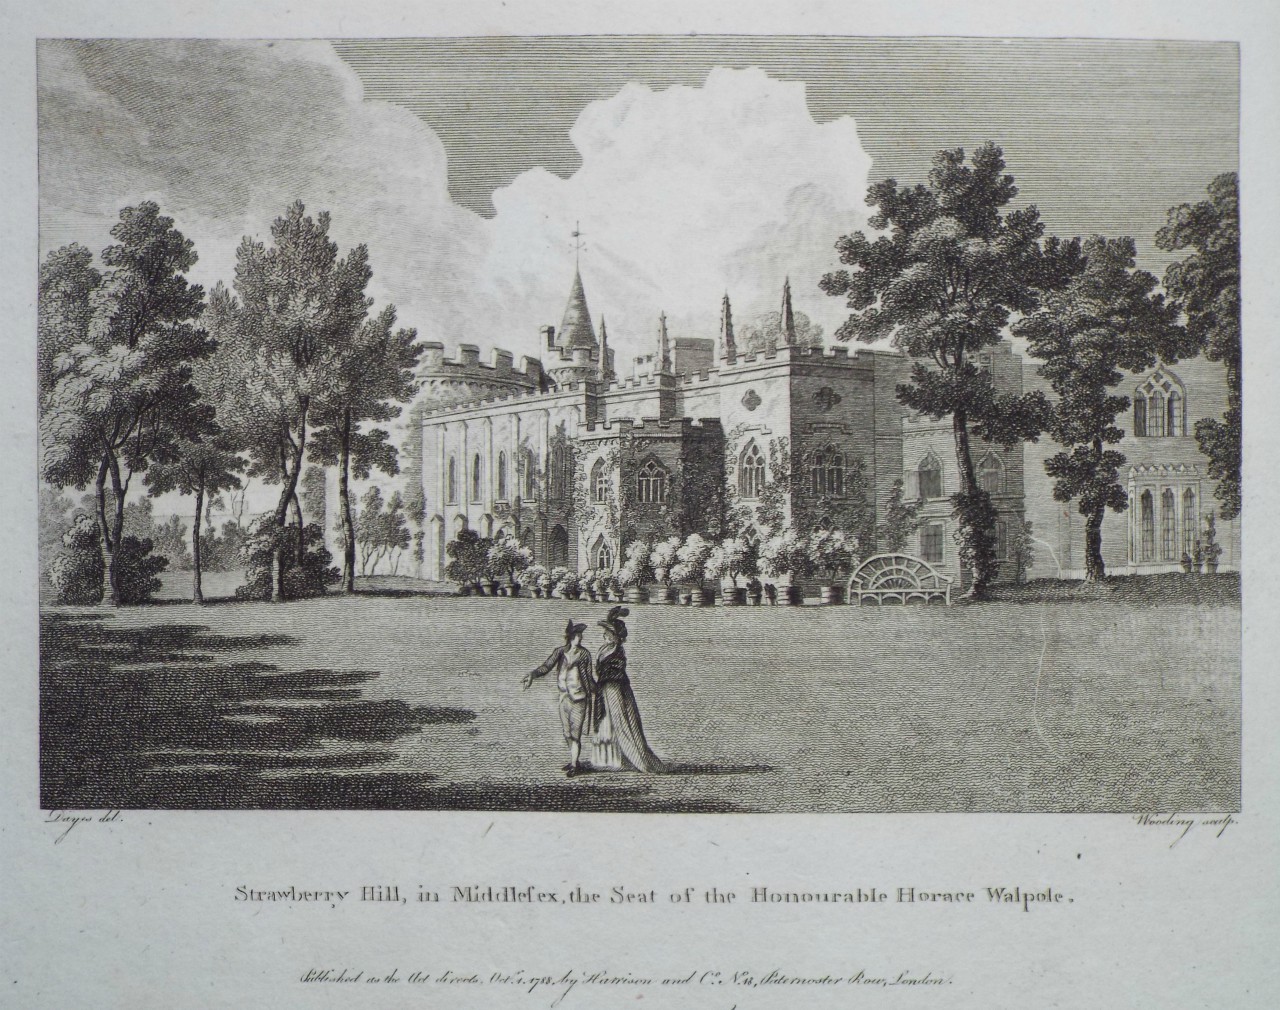 Print - Strawberry Hill, in Middlesex, the Seat of the Honourable Horace Walpole. - 